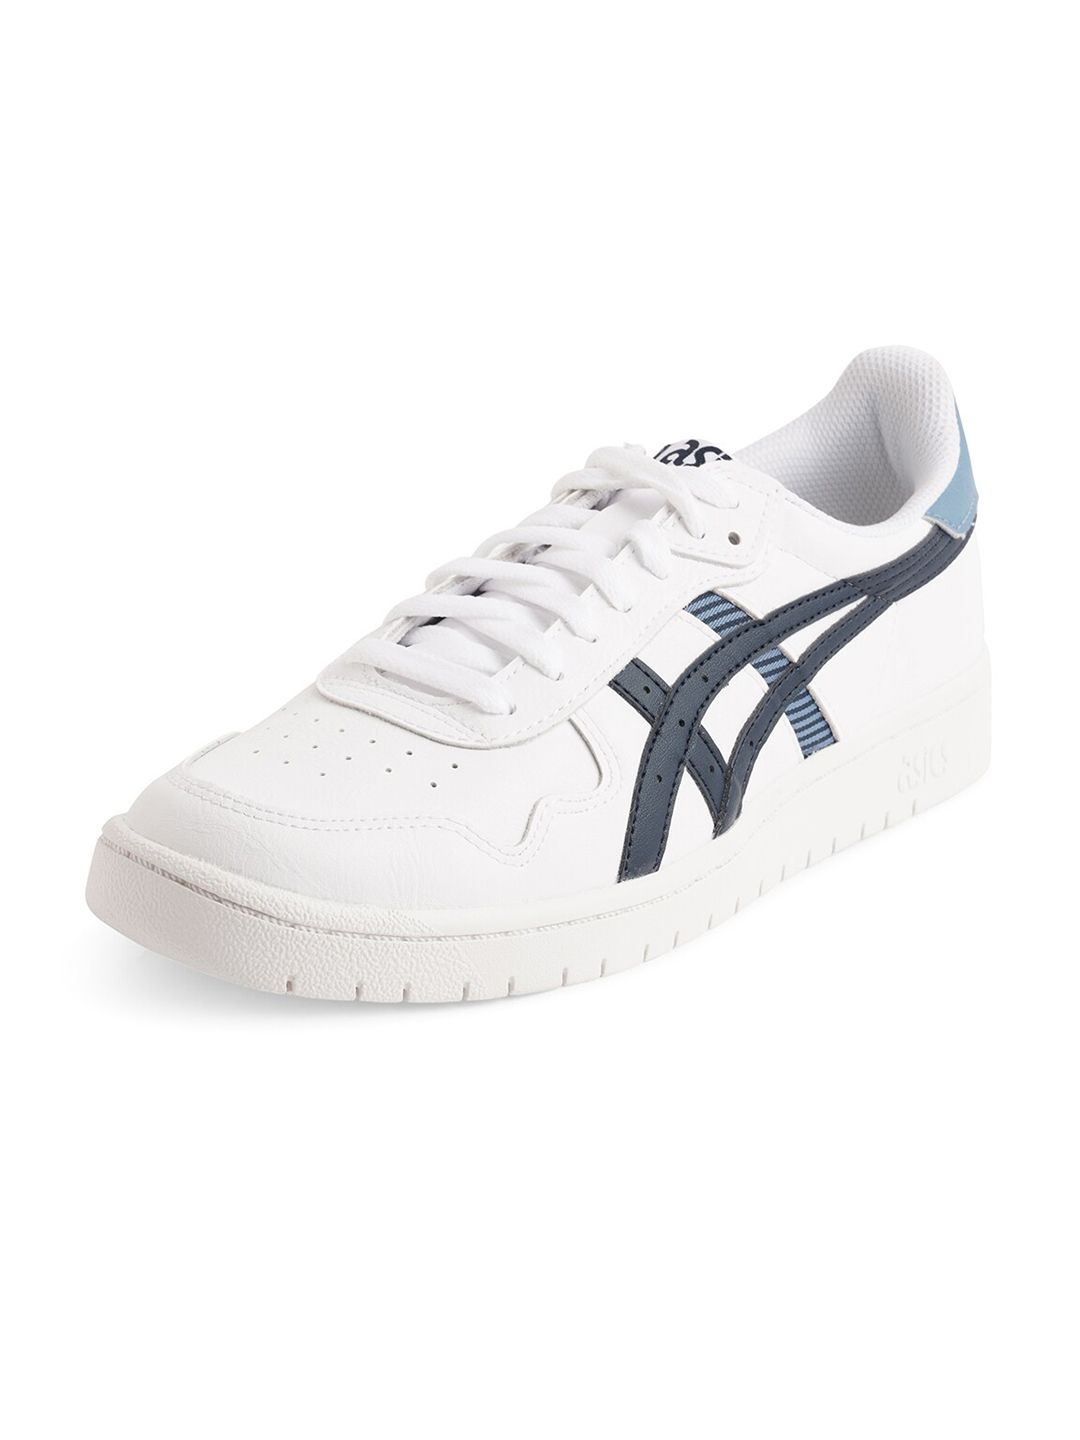 ASICS Women White Japan S Training or Gym Shoes Price in India